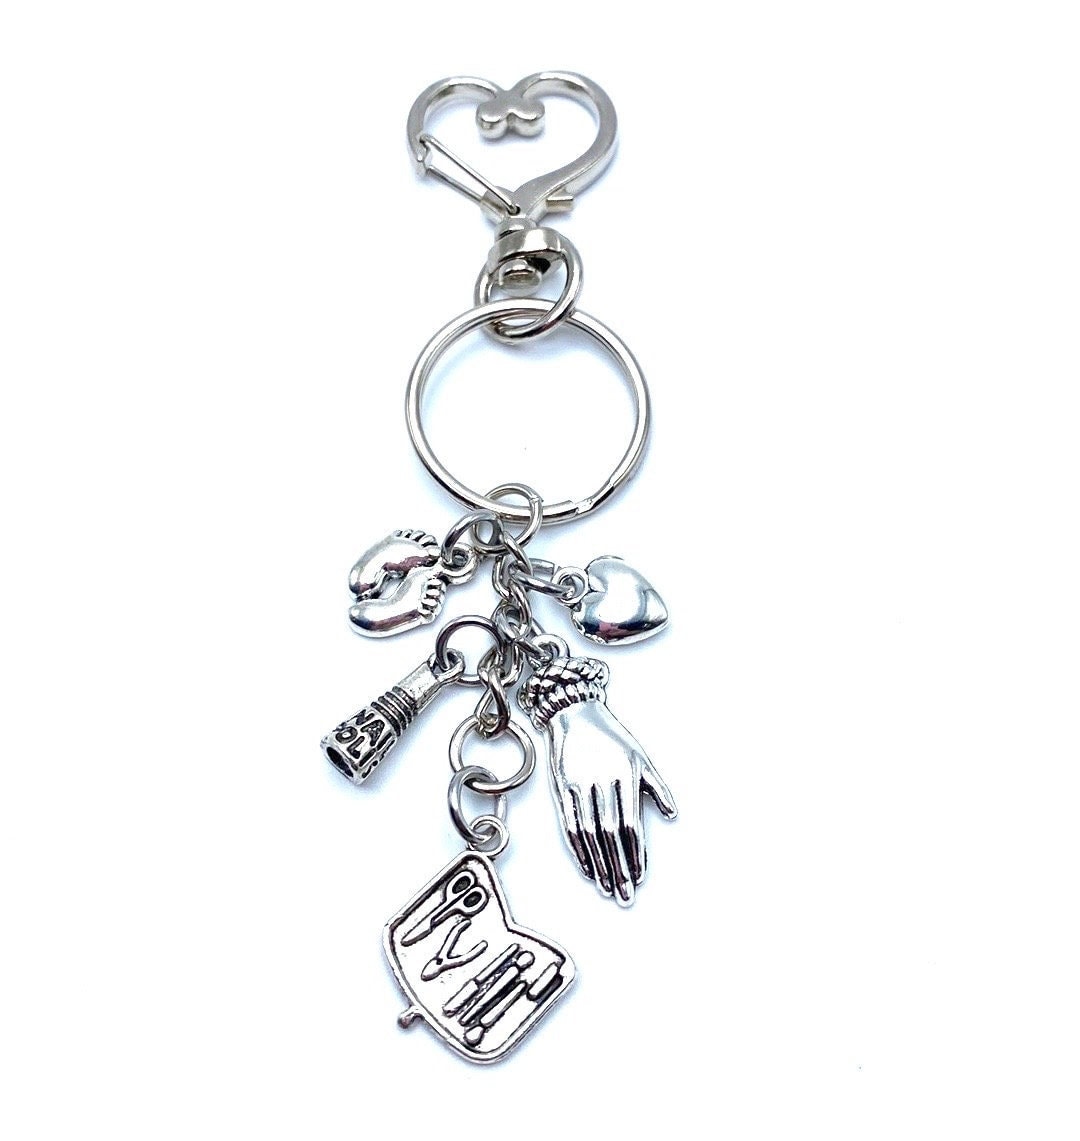 Love Pendant and Chain Nail Art Jewellery Decoration 